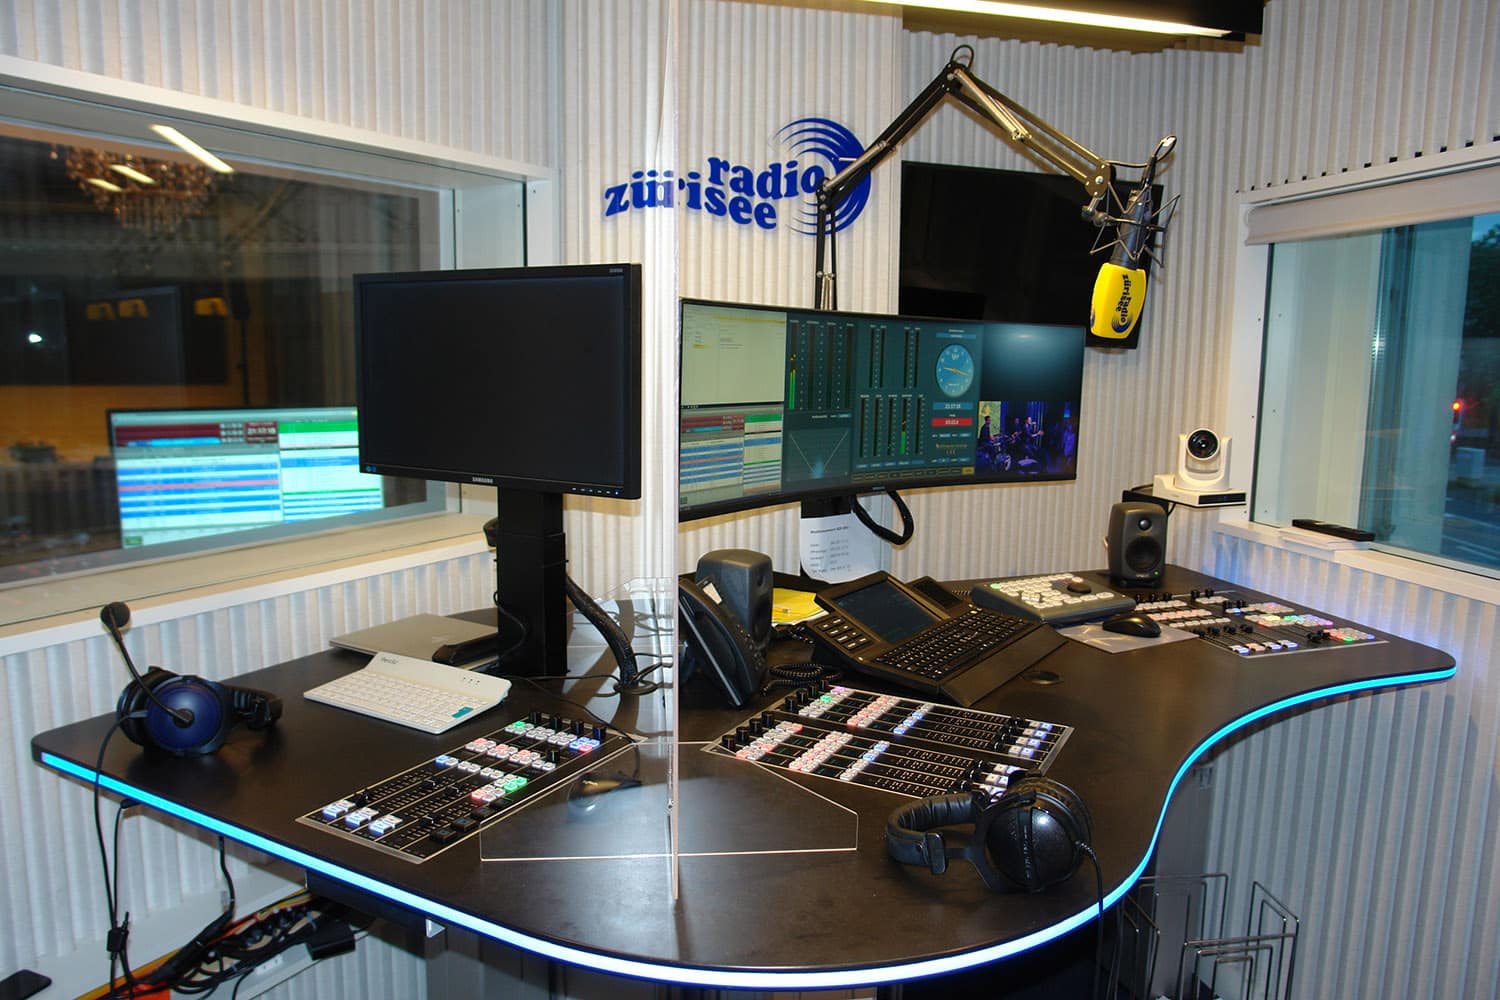 DJs drop into one of two Radio Zürisee studios from time to time to produce content on LXE console surfaces